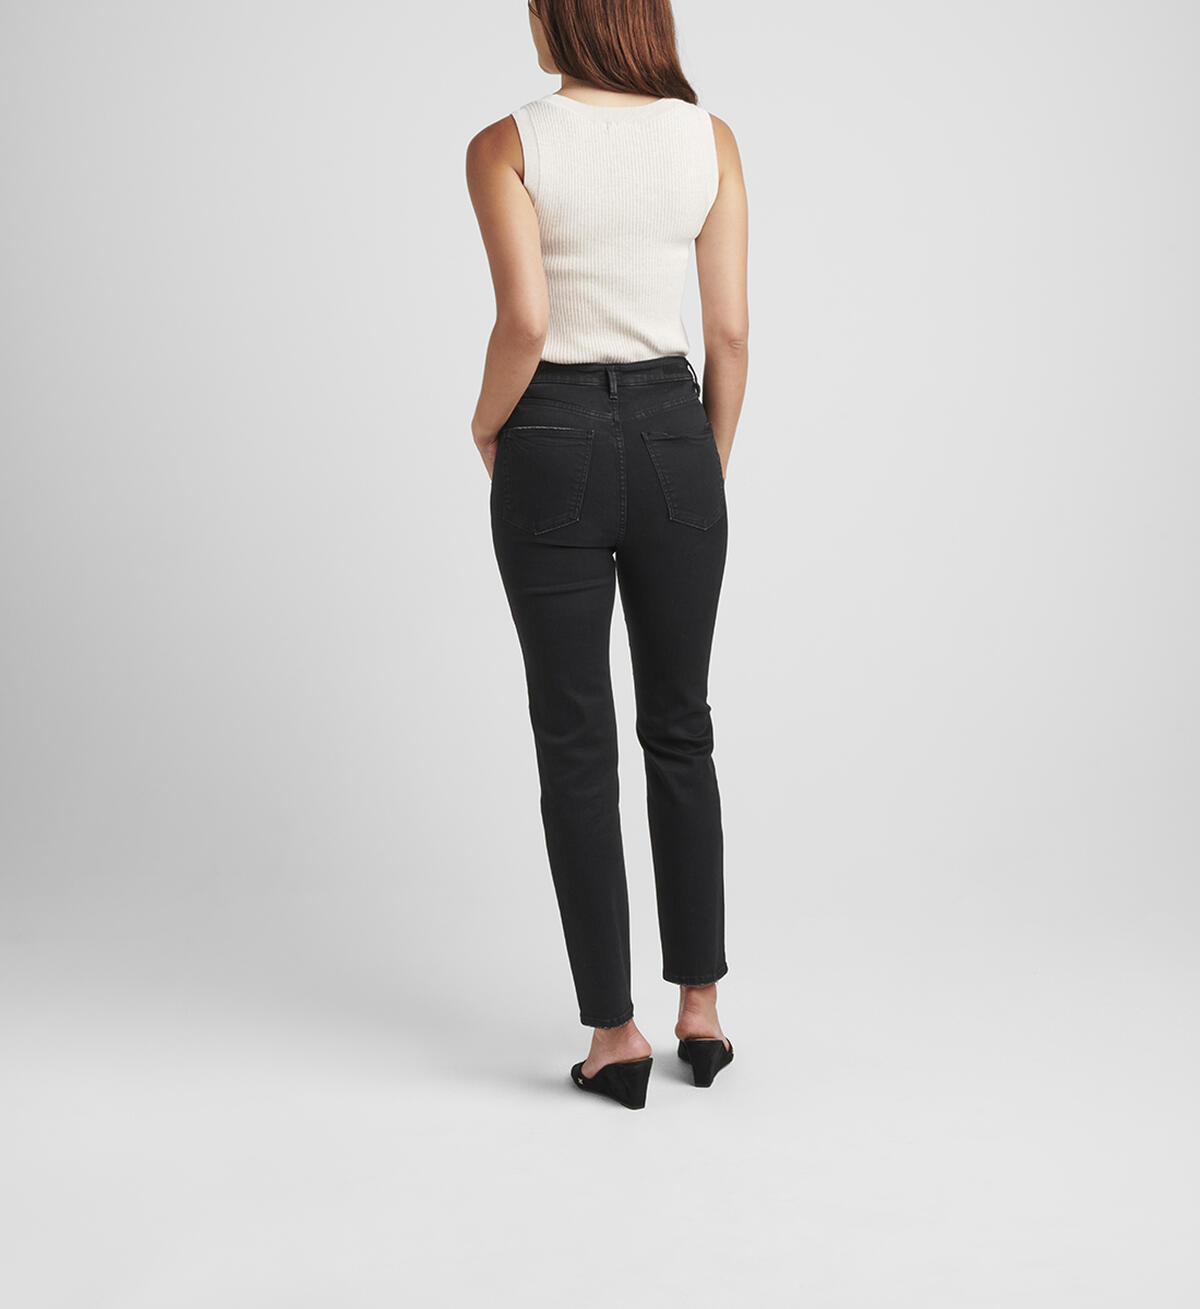 Aikins High Rise Straight Leg Jeans, , hi-res image number 1